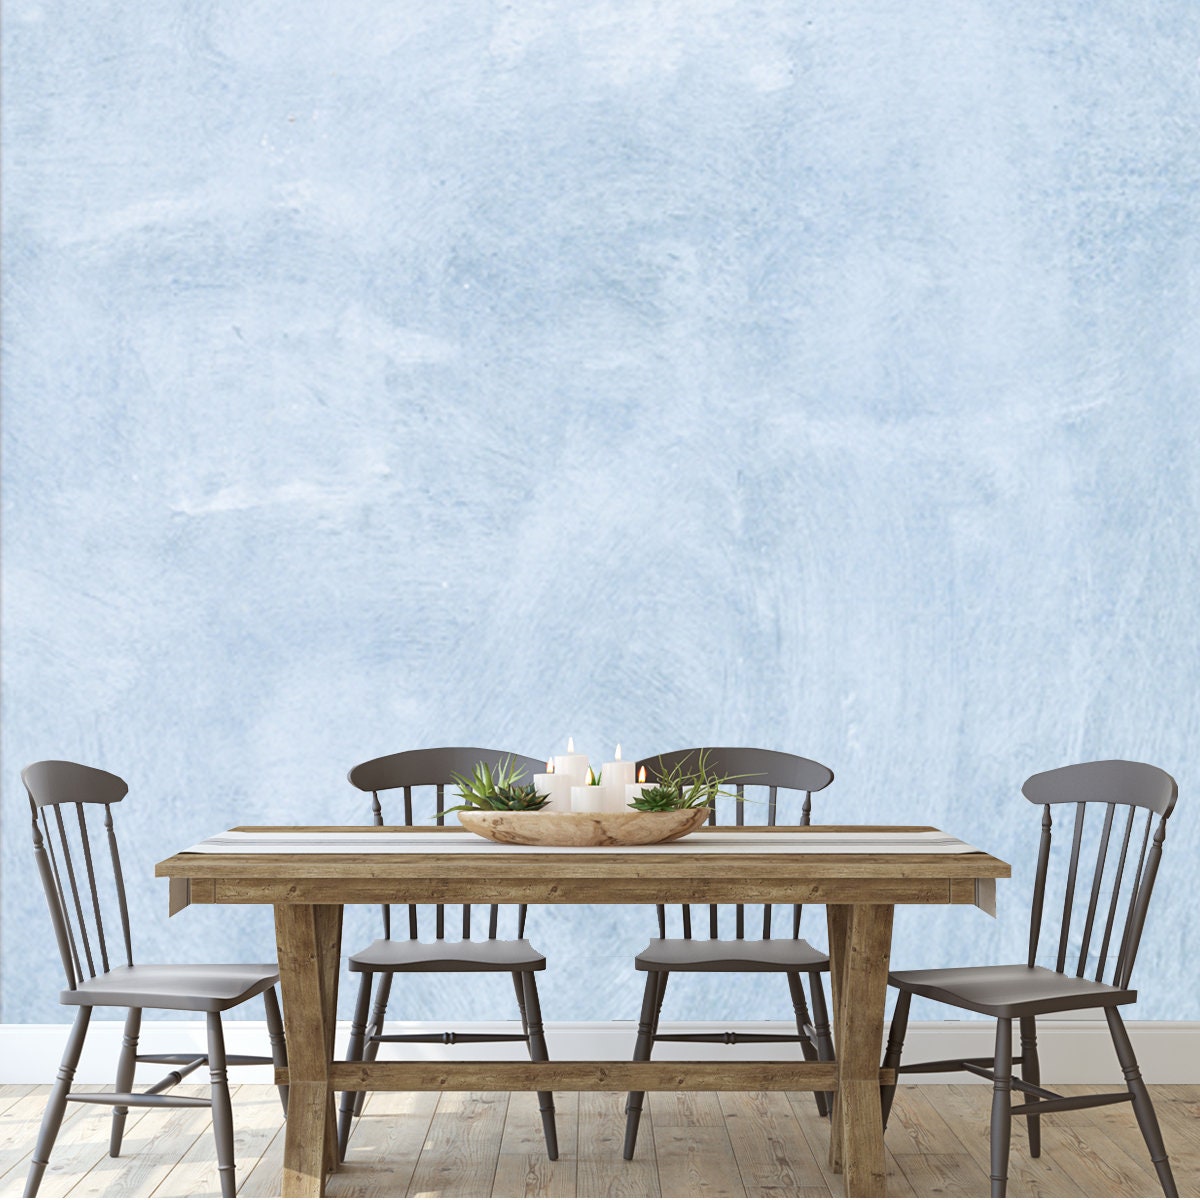 Abstract Wide Angle Light Blue Stucco Background Wallpaper Dining Room Mural